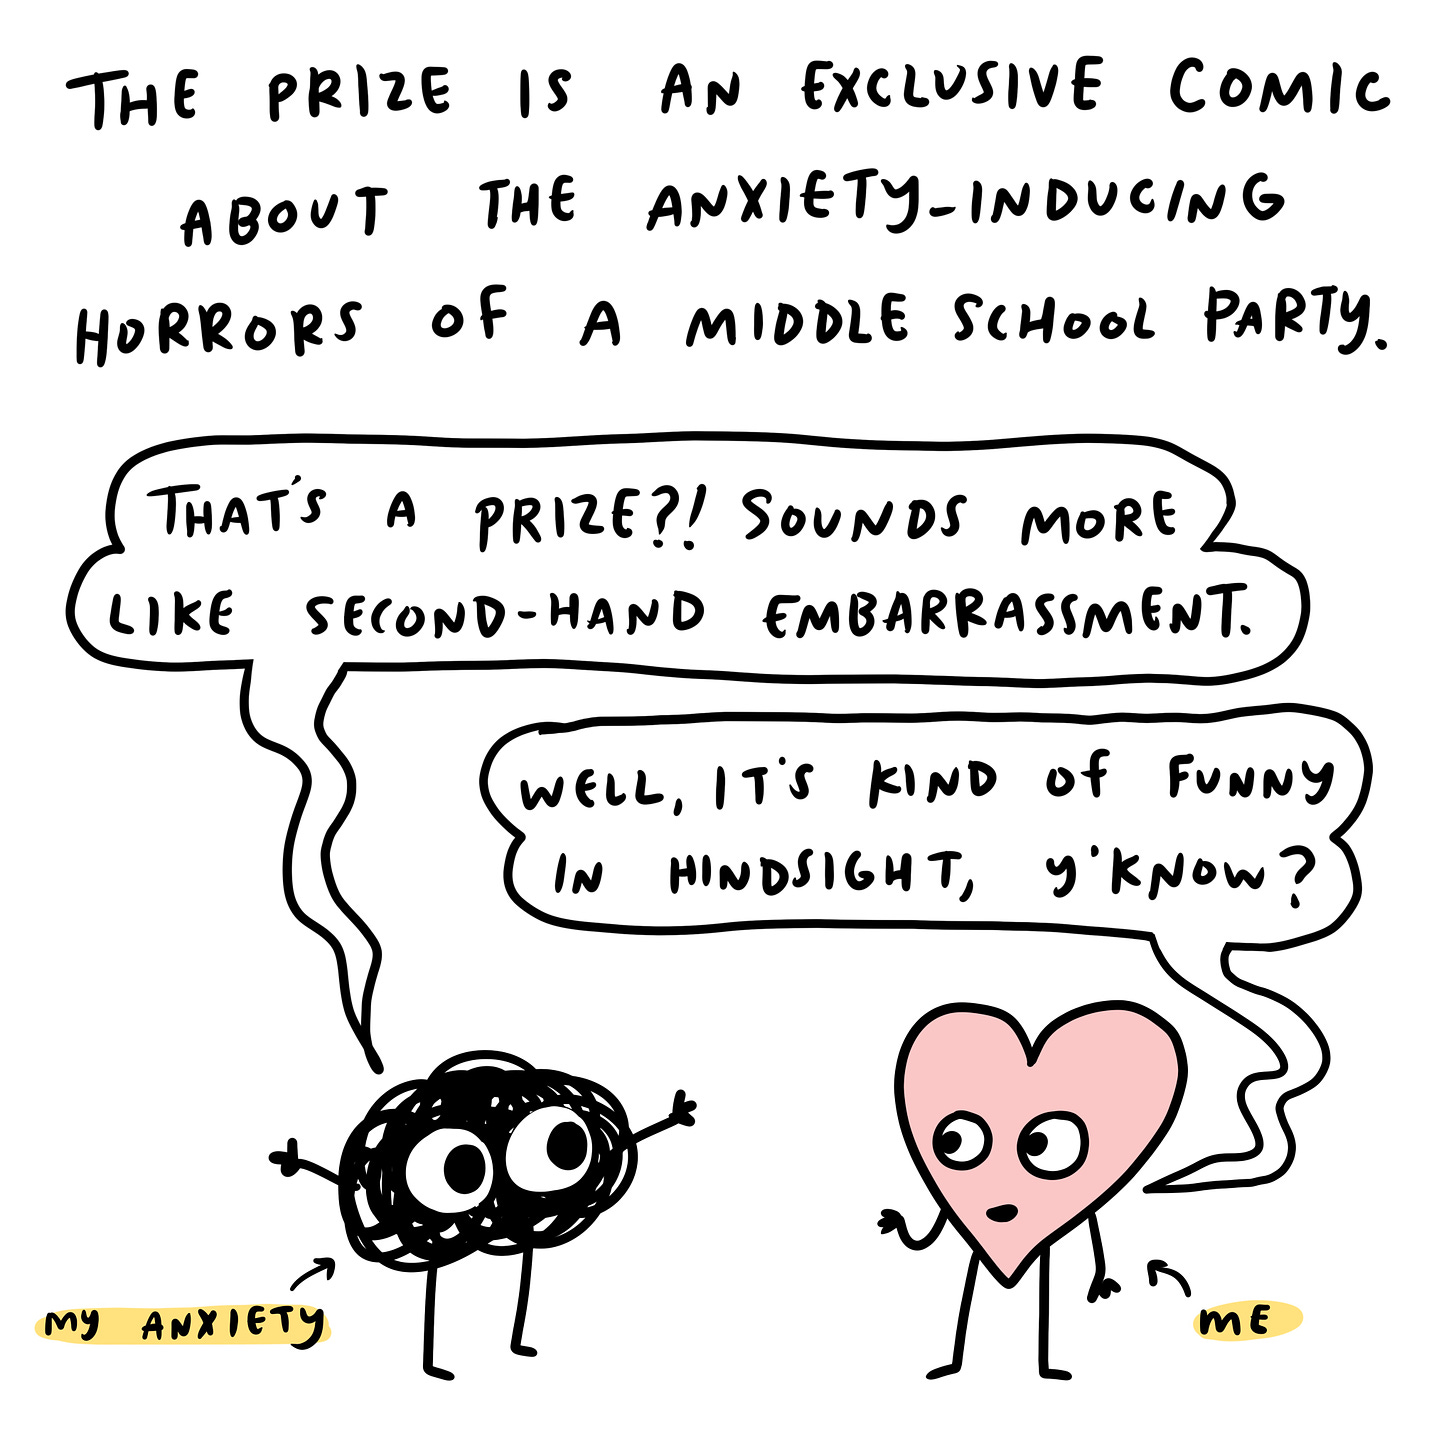 This prize is an exclusive, never-before-seen comic about the anxiety-inducing horrors of a middle school party.  Anxiety: that’s a prize? Sounds more like second-hand embarrassment. Me: well, it’s kind of funny once you’re not in middle school anymore, so.